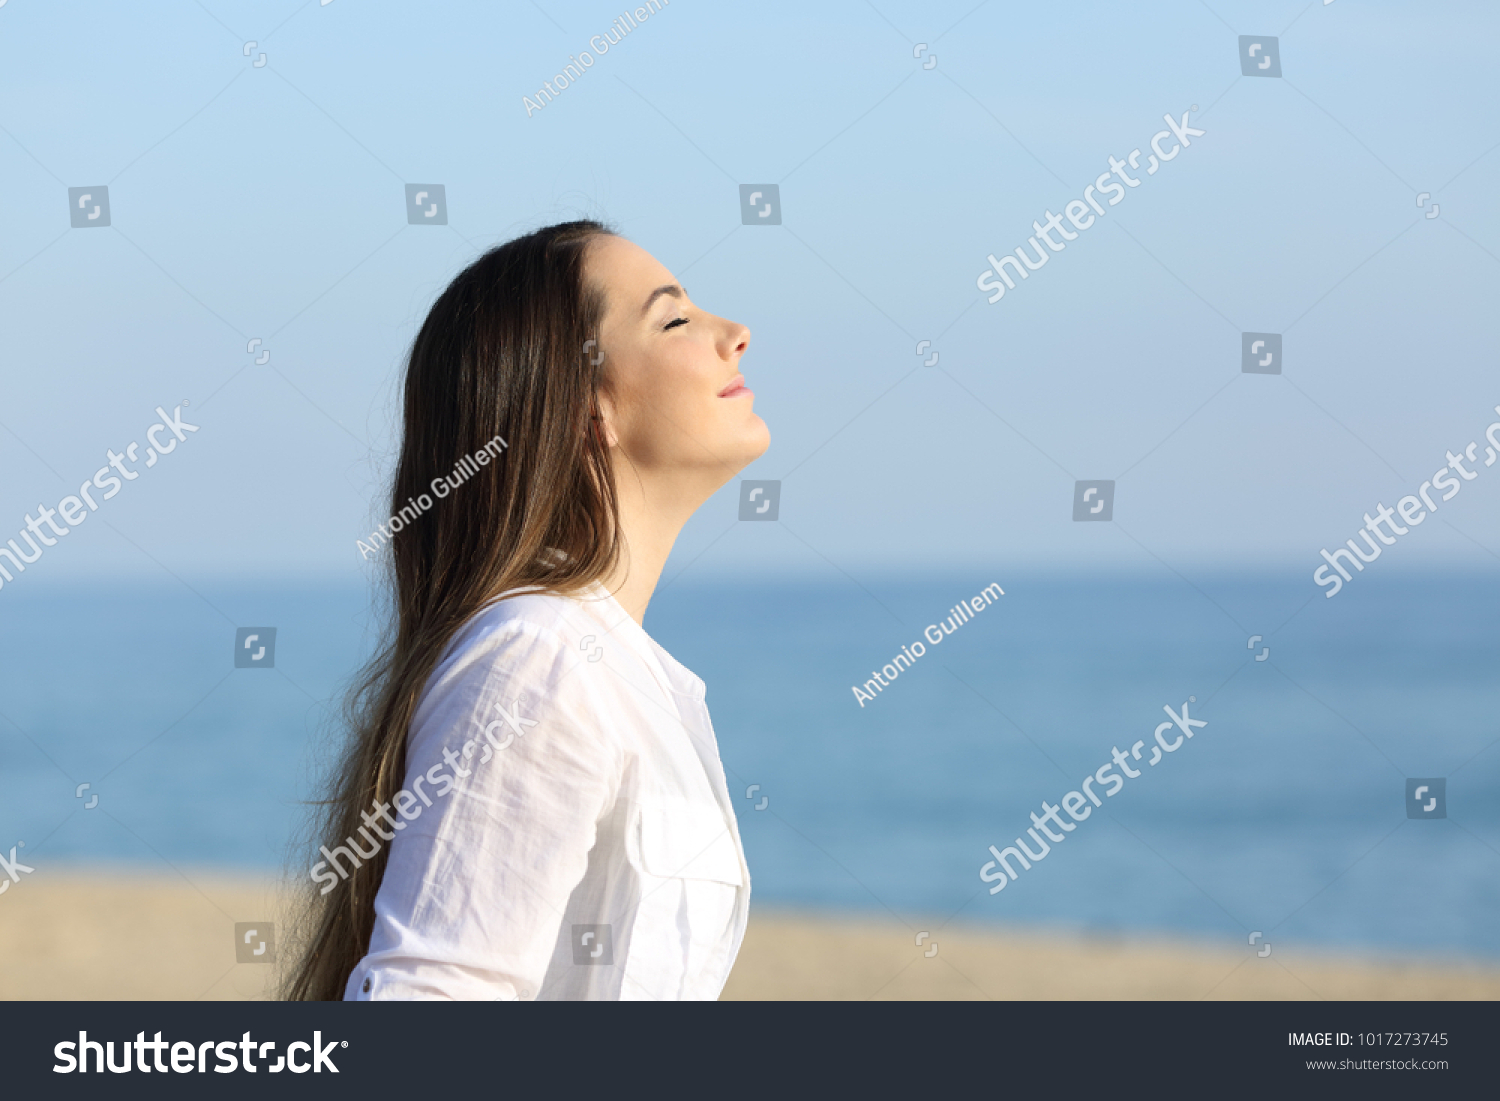 Side view portrait of a woman relaxing breathing fresh air on the beach #1017273745